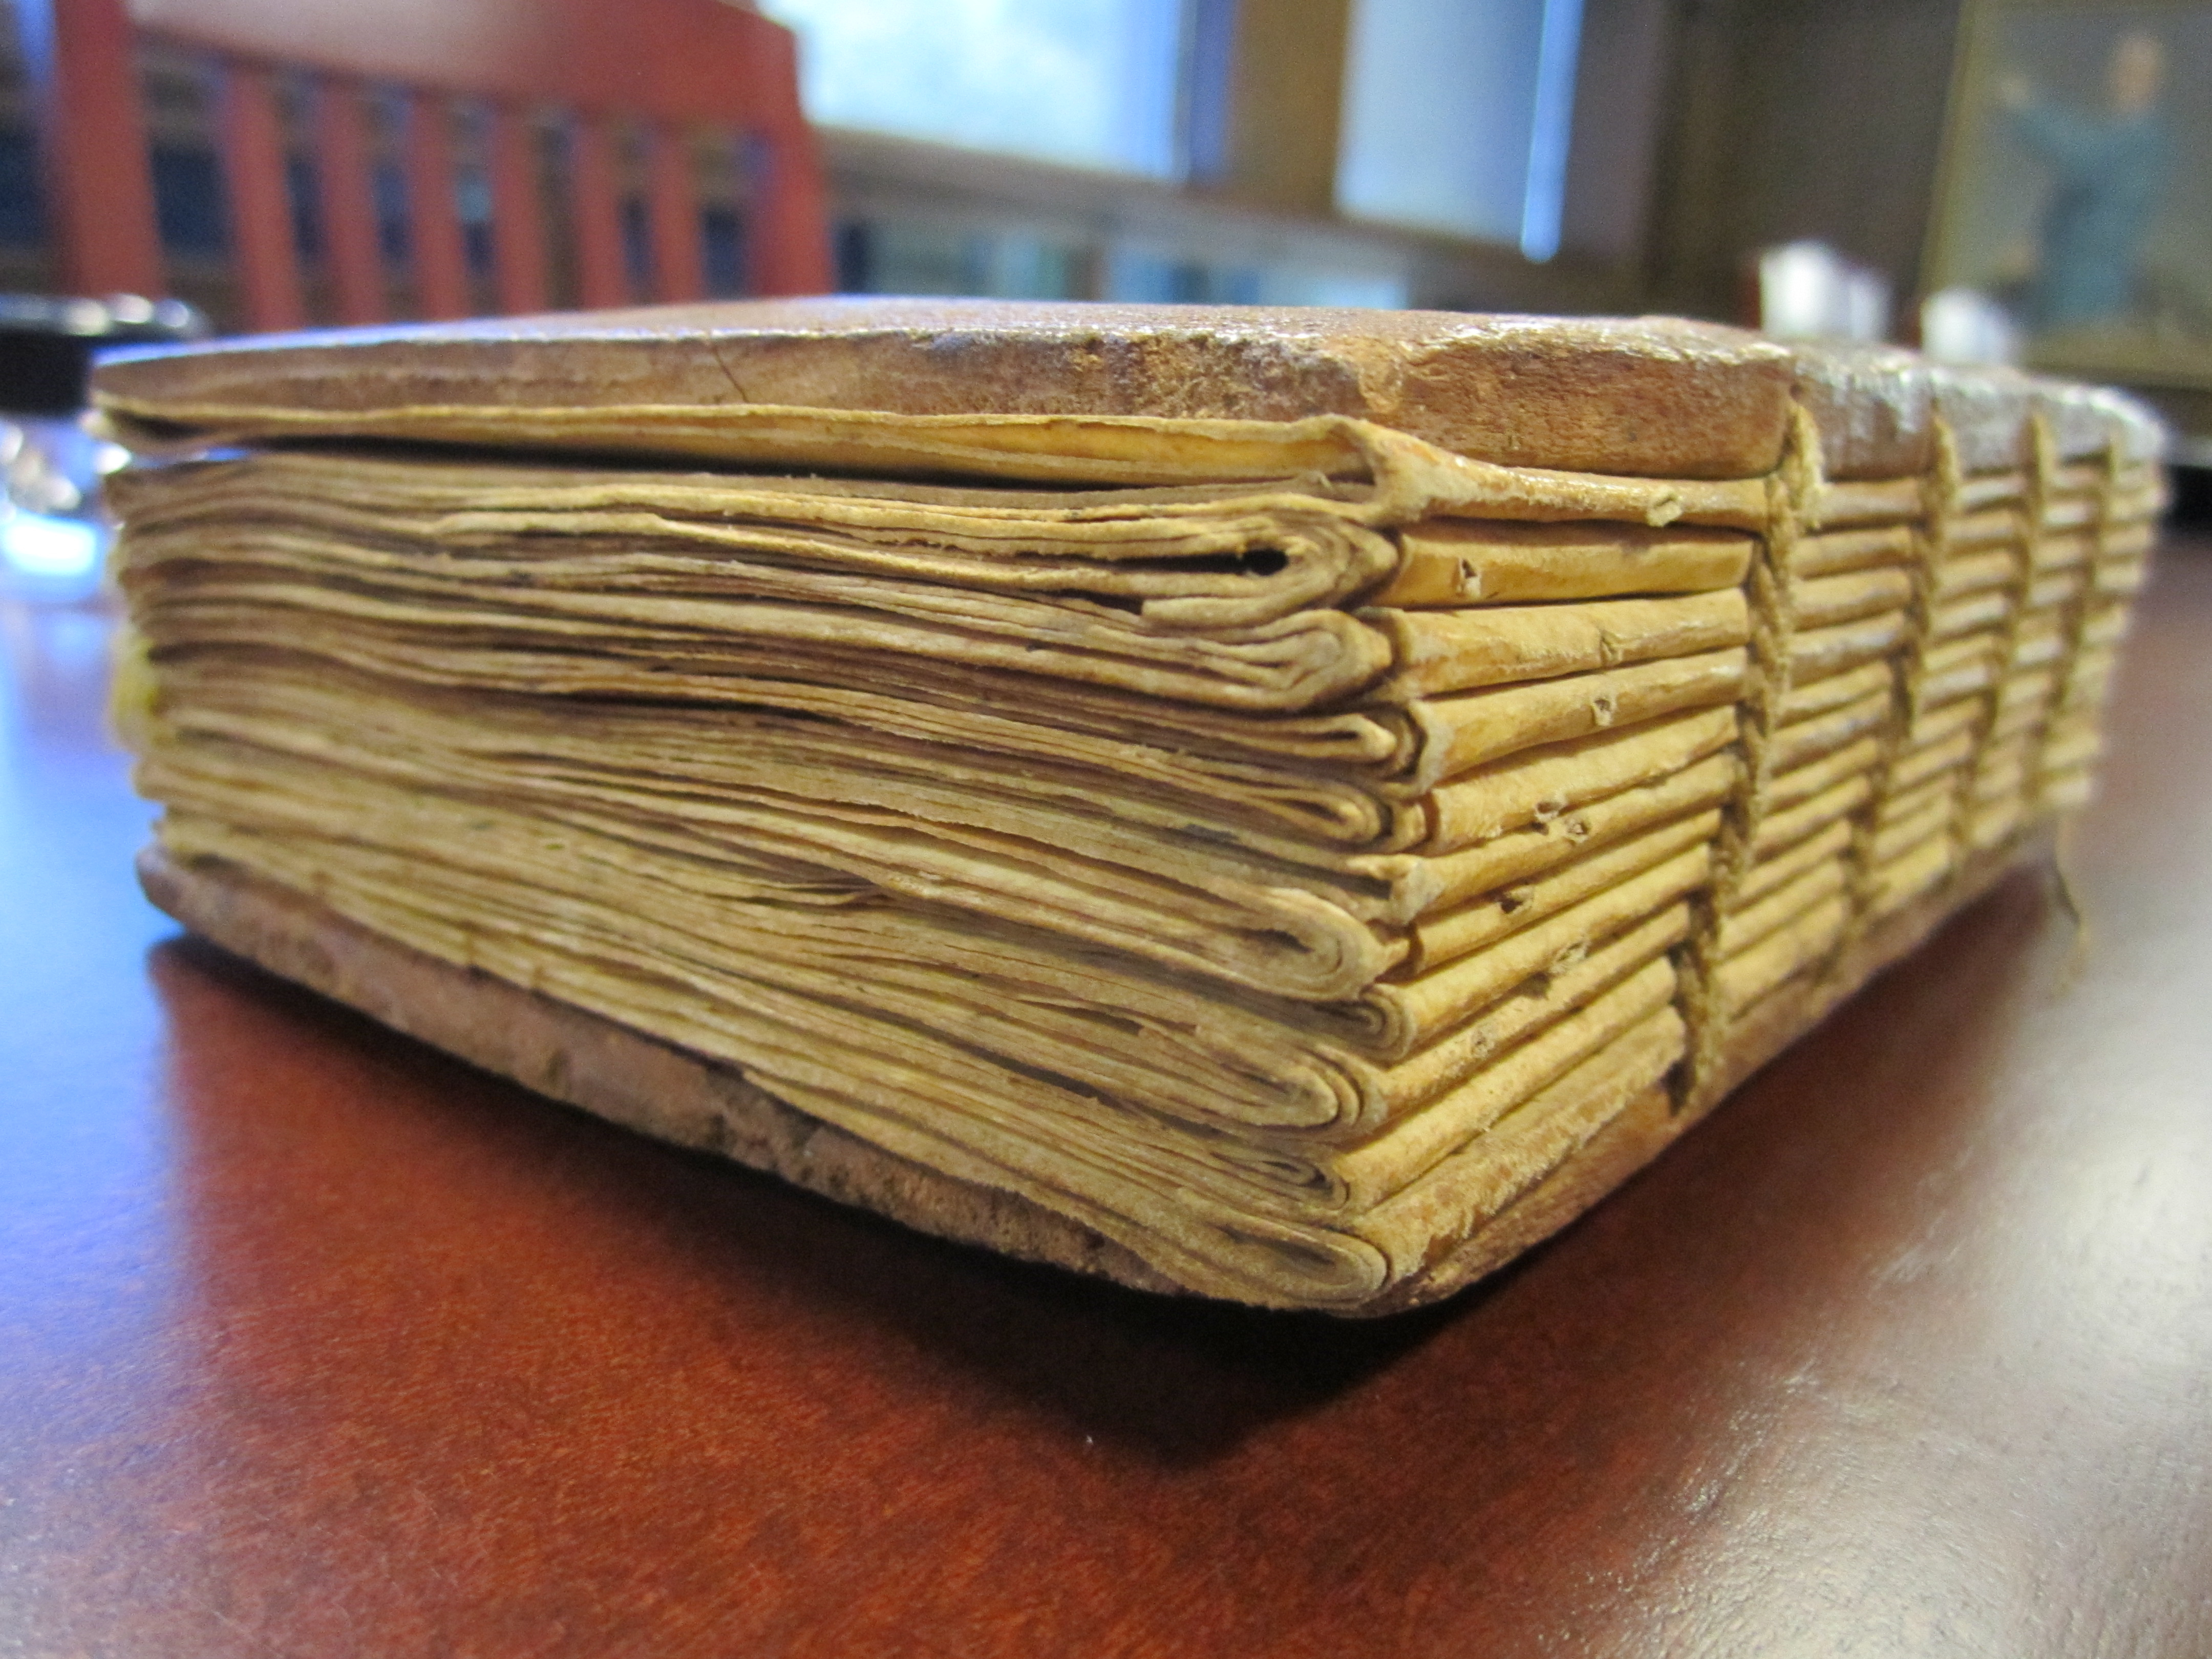 Medieval Bindings holding image waiting on new one from Eilish